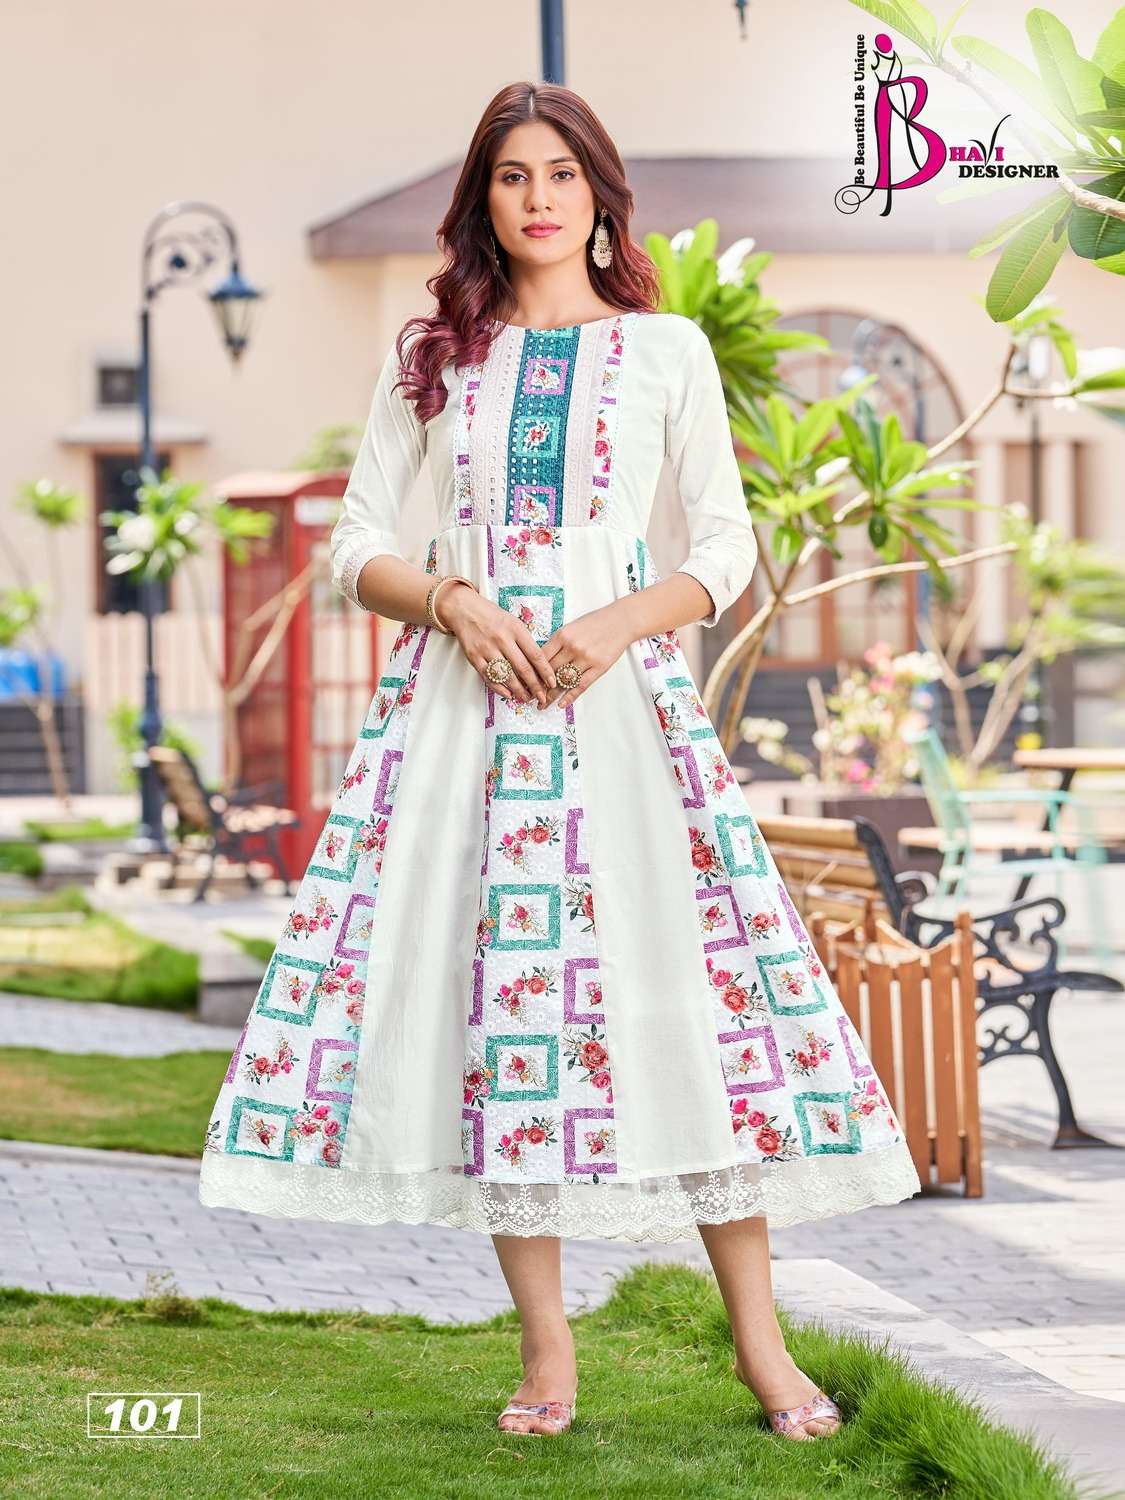 bhavi designer catalogue breeze vol 1 series 101 to 103 designer gown skirt stylish frock girlish stylish gown in affordable price 